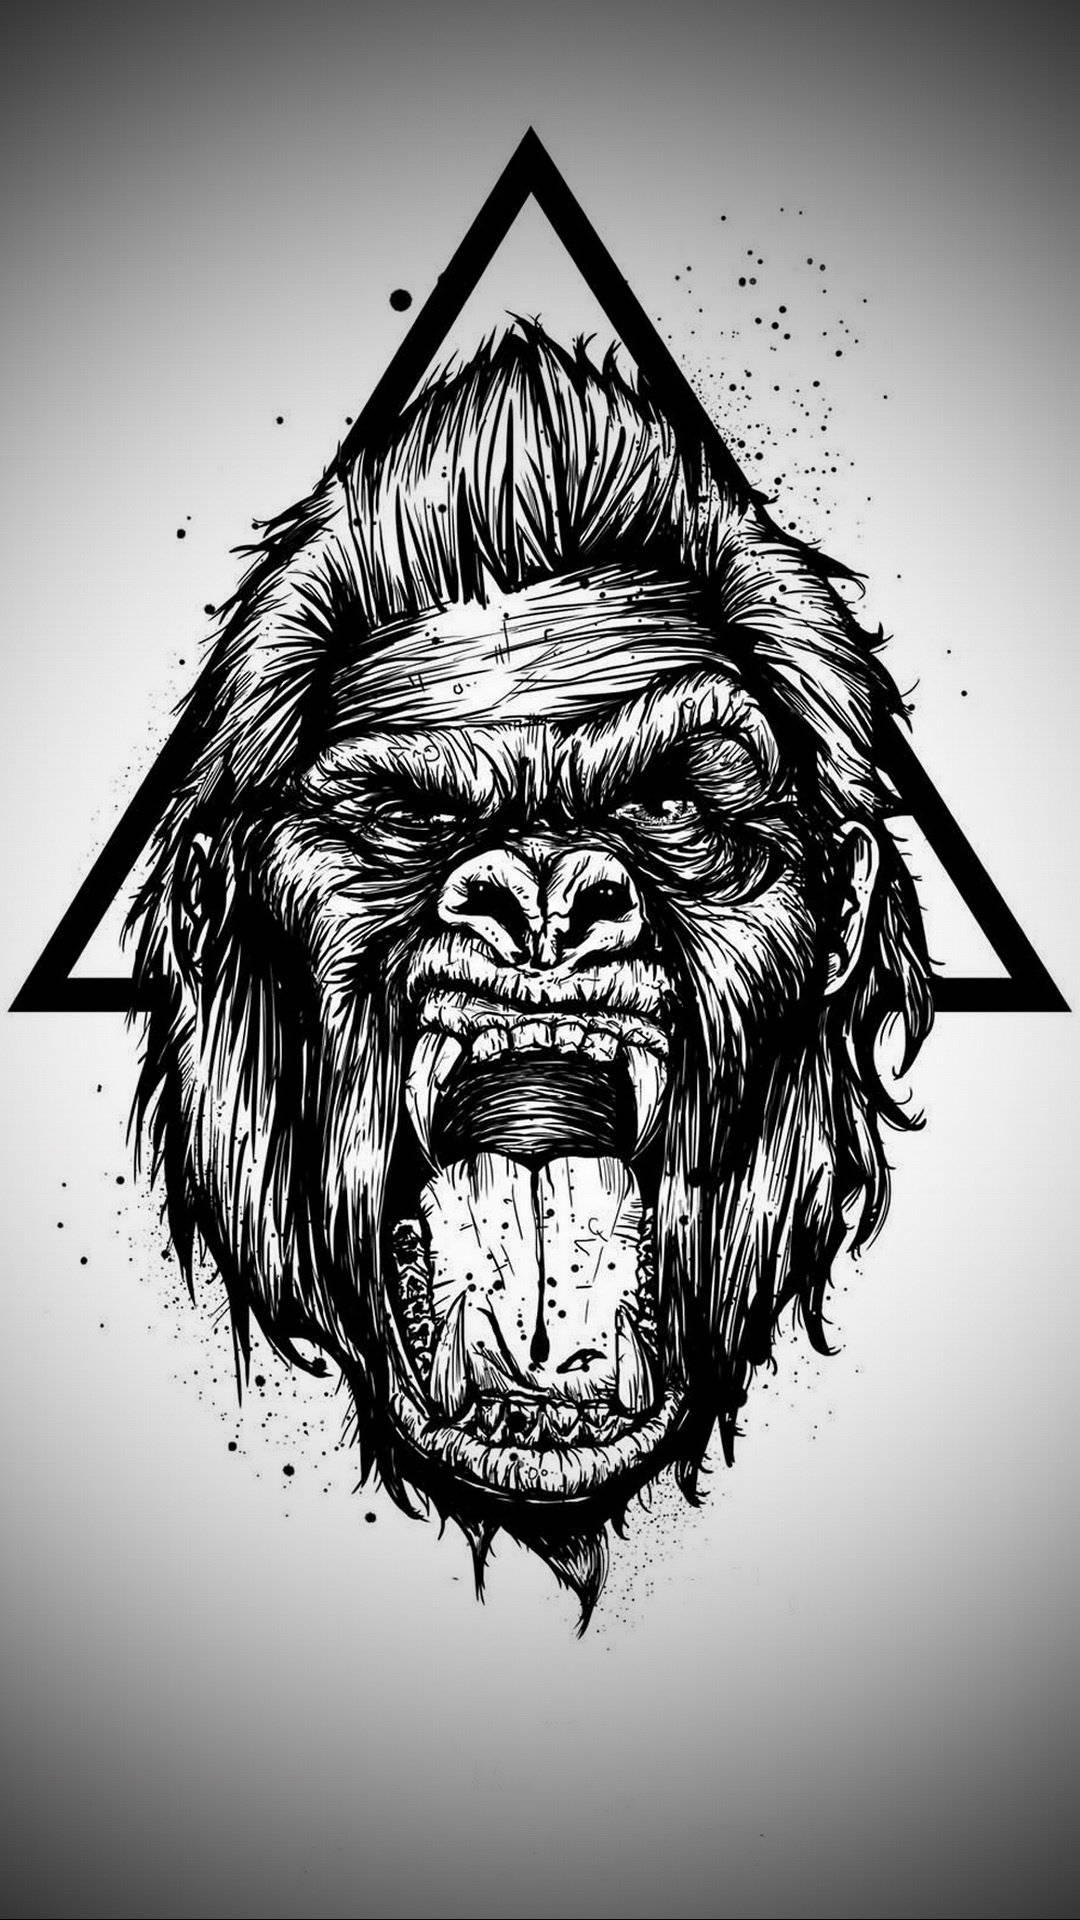 Mouth Wide Open Gorilla Iphone Wallpaper